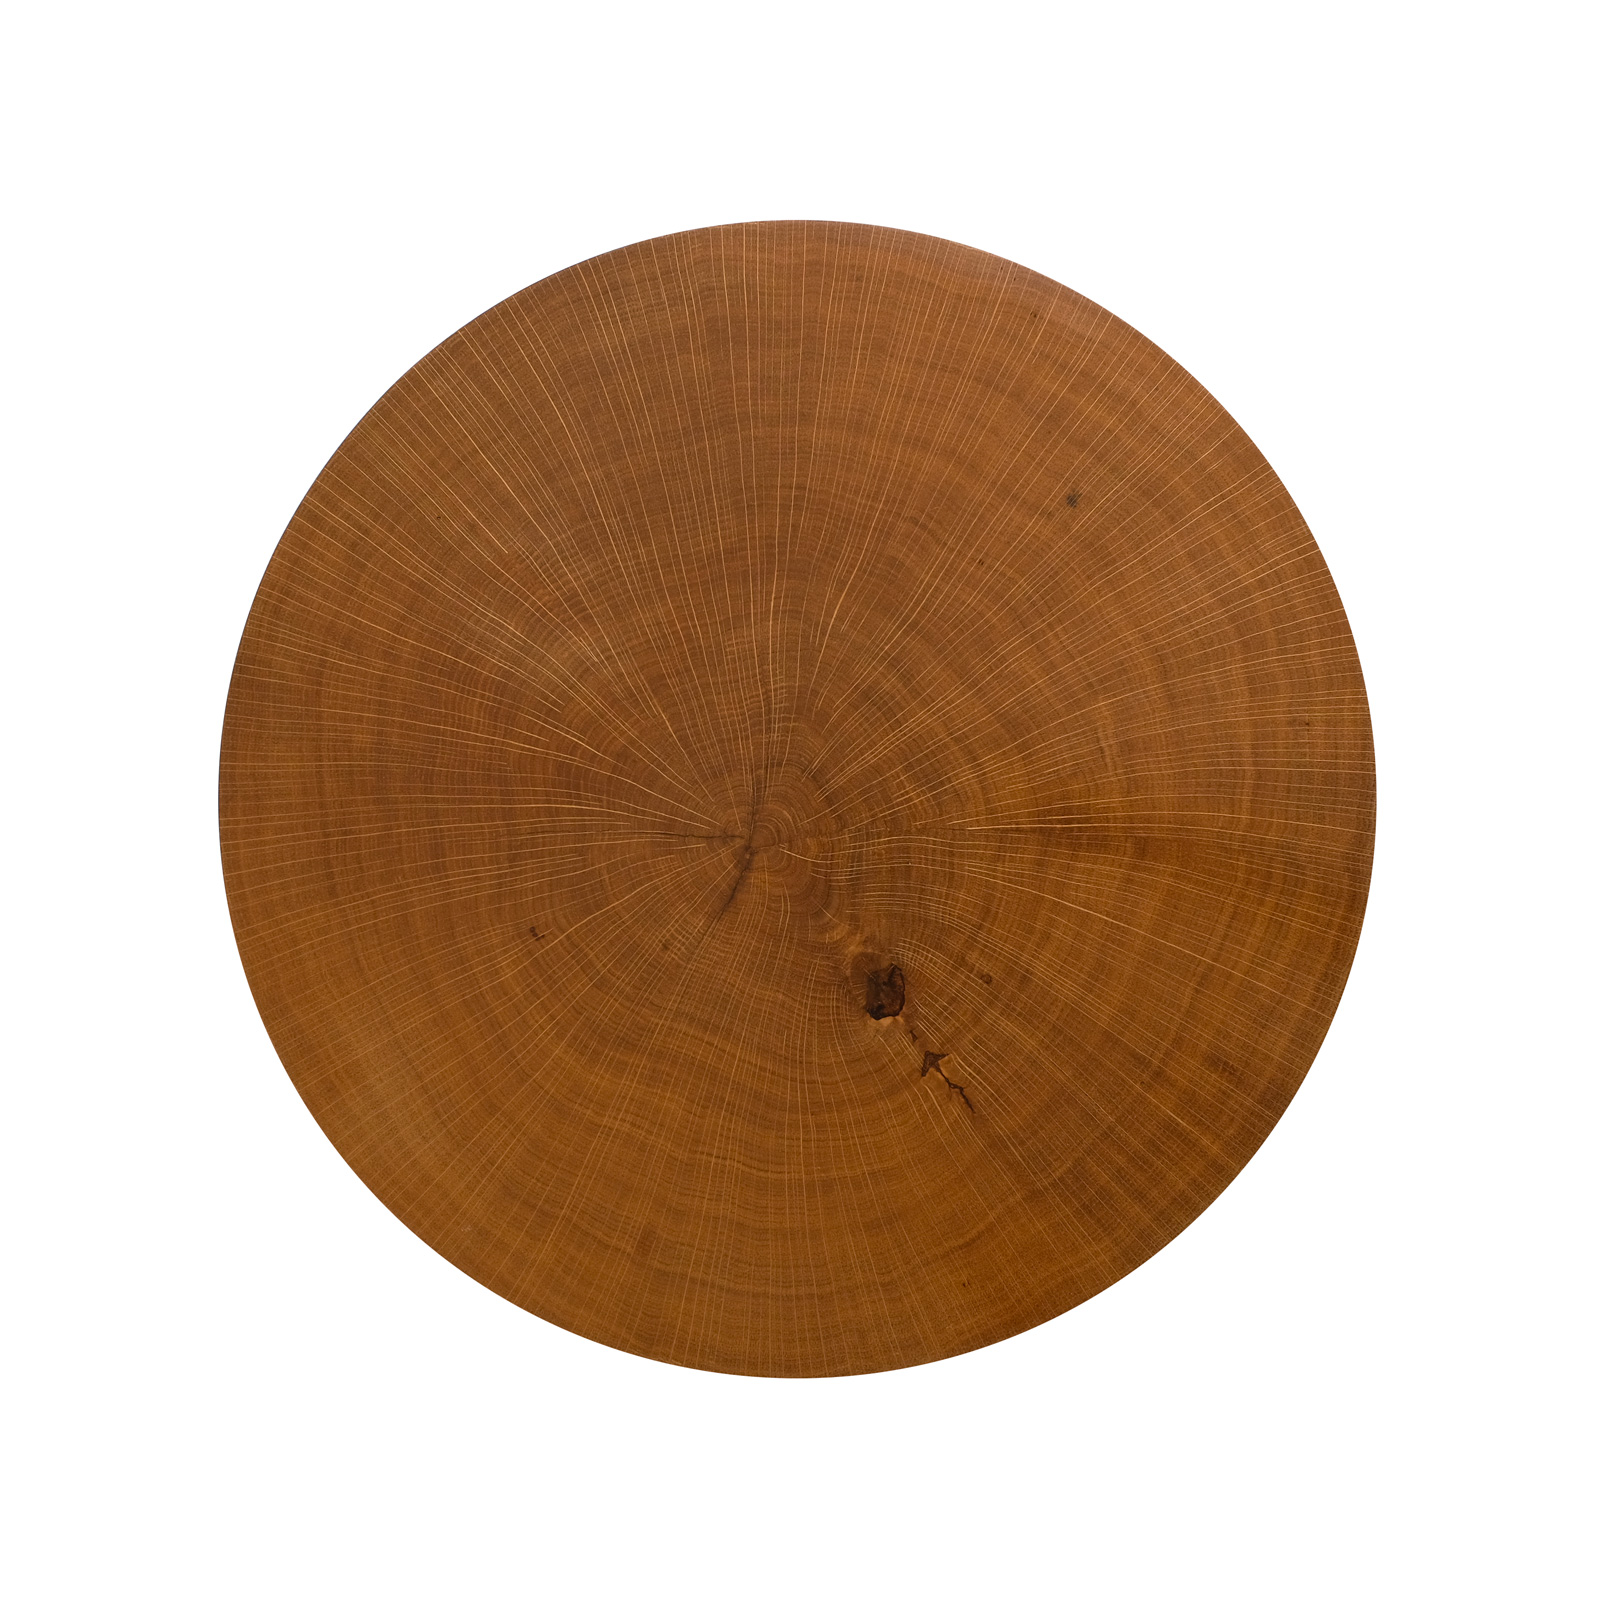 Genuine Cross-Cut Oak creates a decorative, eye-catching top for a simple, yet unique martini table.